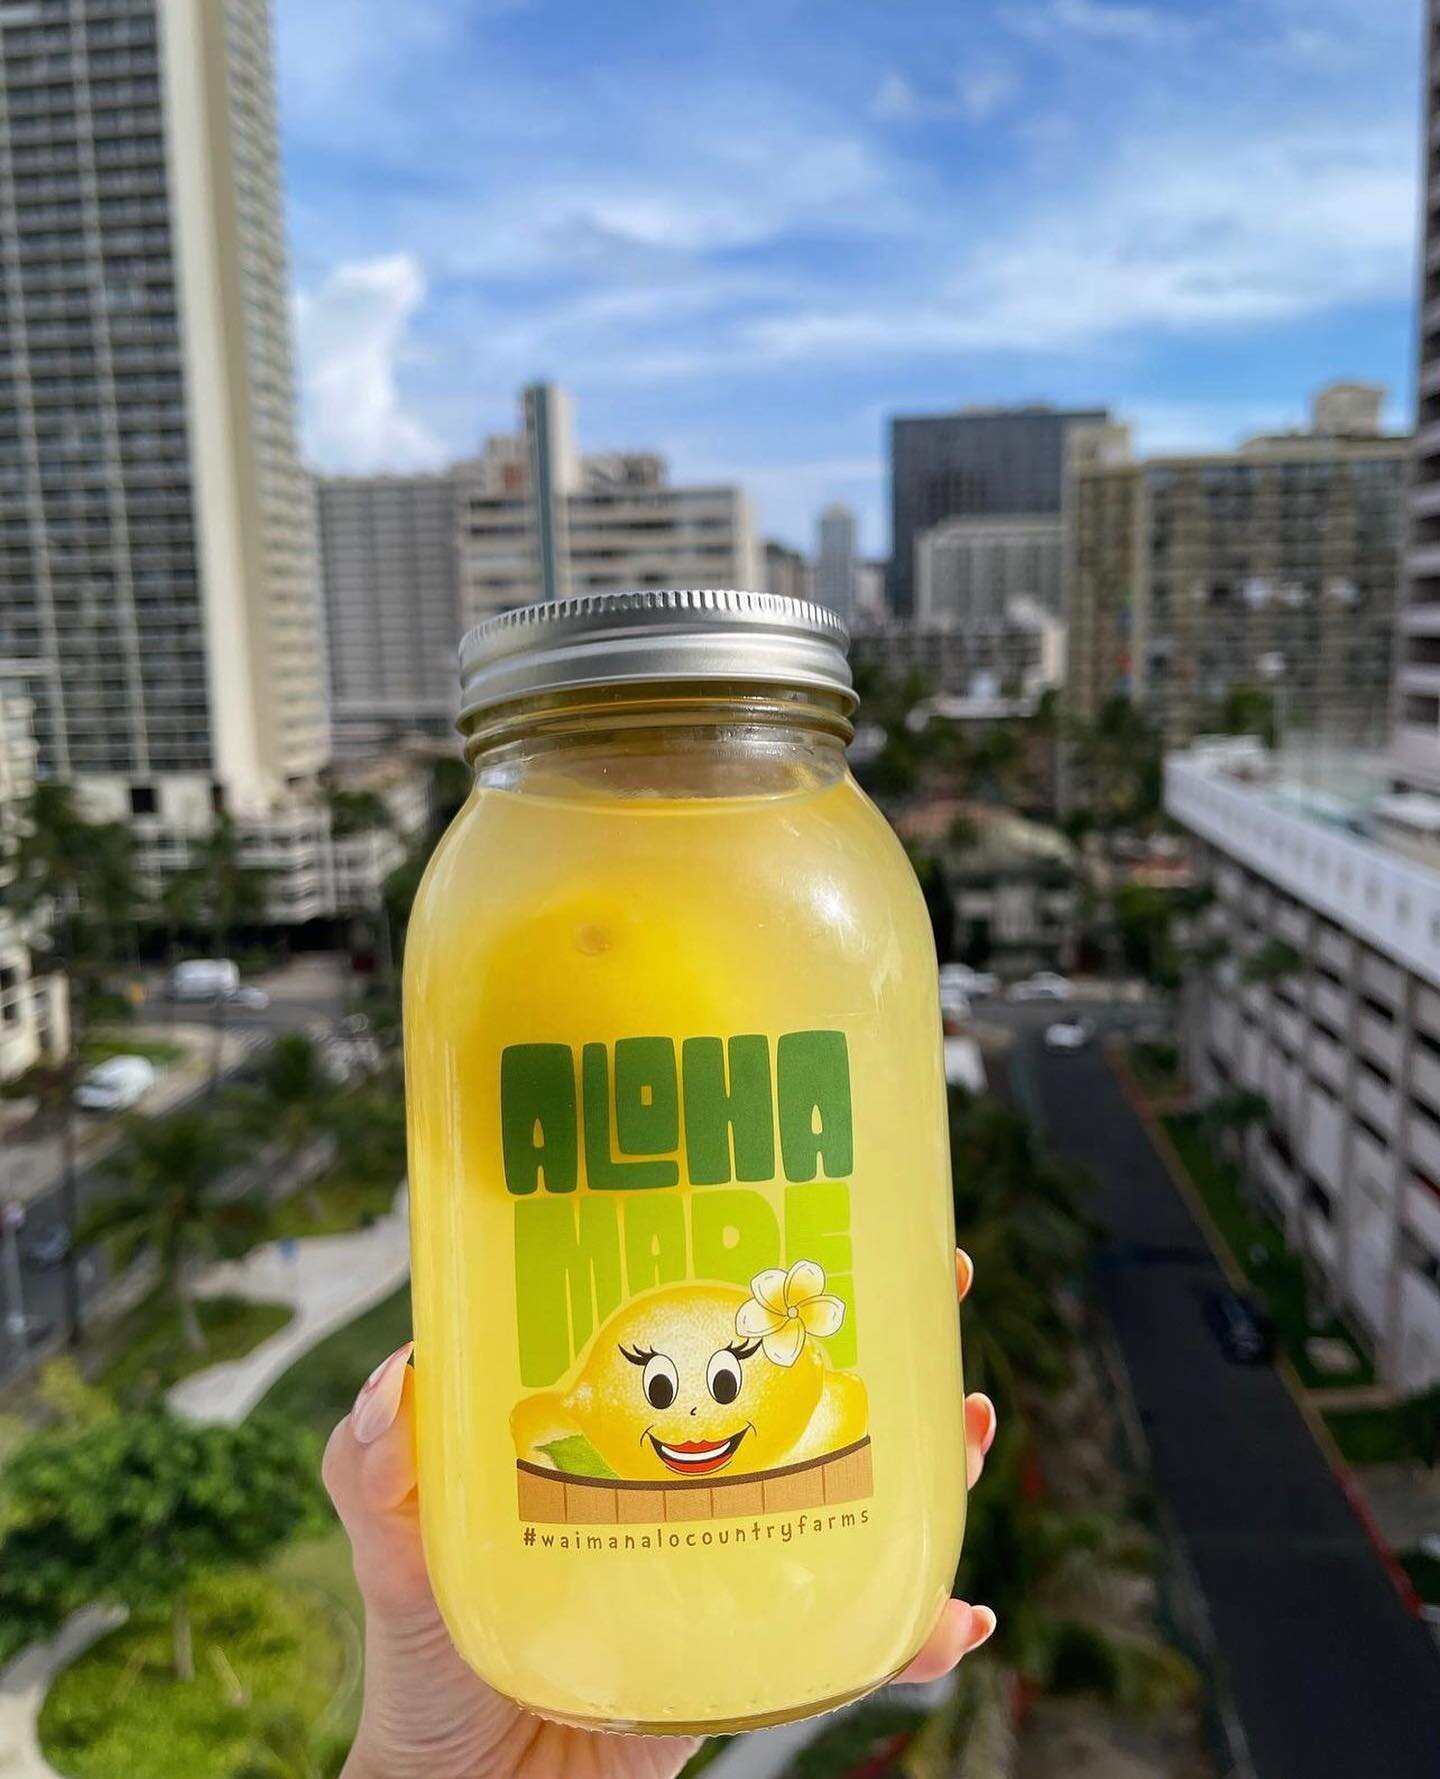 Find us at the Kailua Farmers&rsquo; Market tonight 03/09 from 4pm-7:15pm &amp; on Saturday at the KCC farmers&rsquo; market from 7am-11:15am 🍋 

Bring your clean #nalomadelemonade jars for your discounted refills 😊

Snap a photo when you stop by a